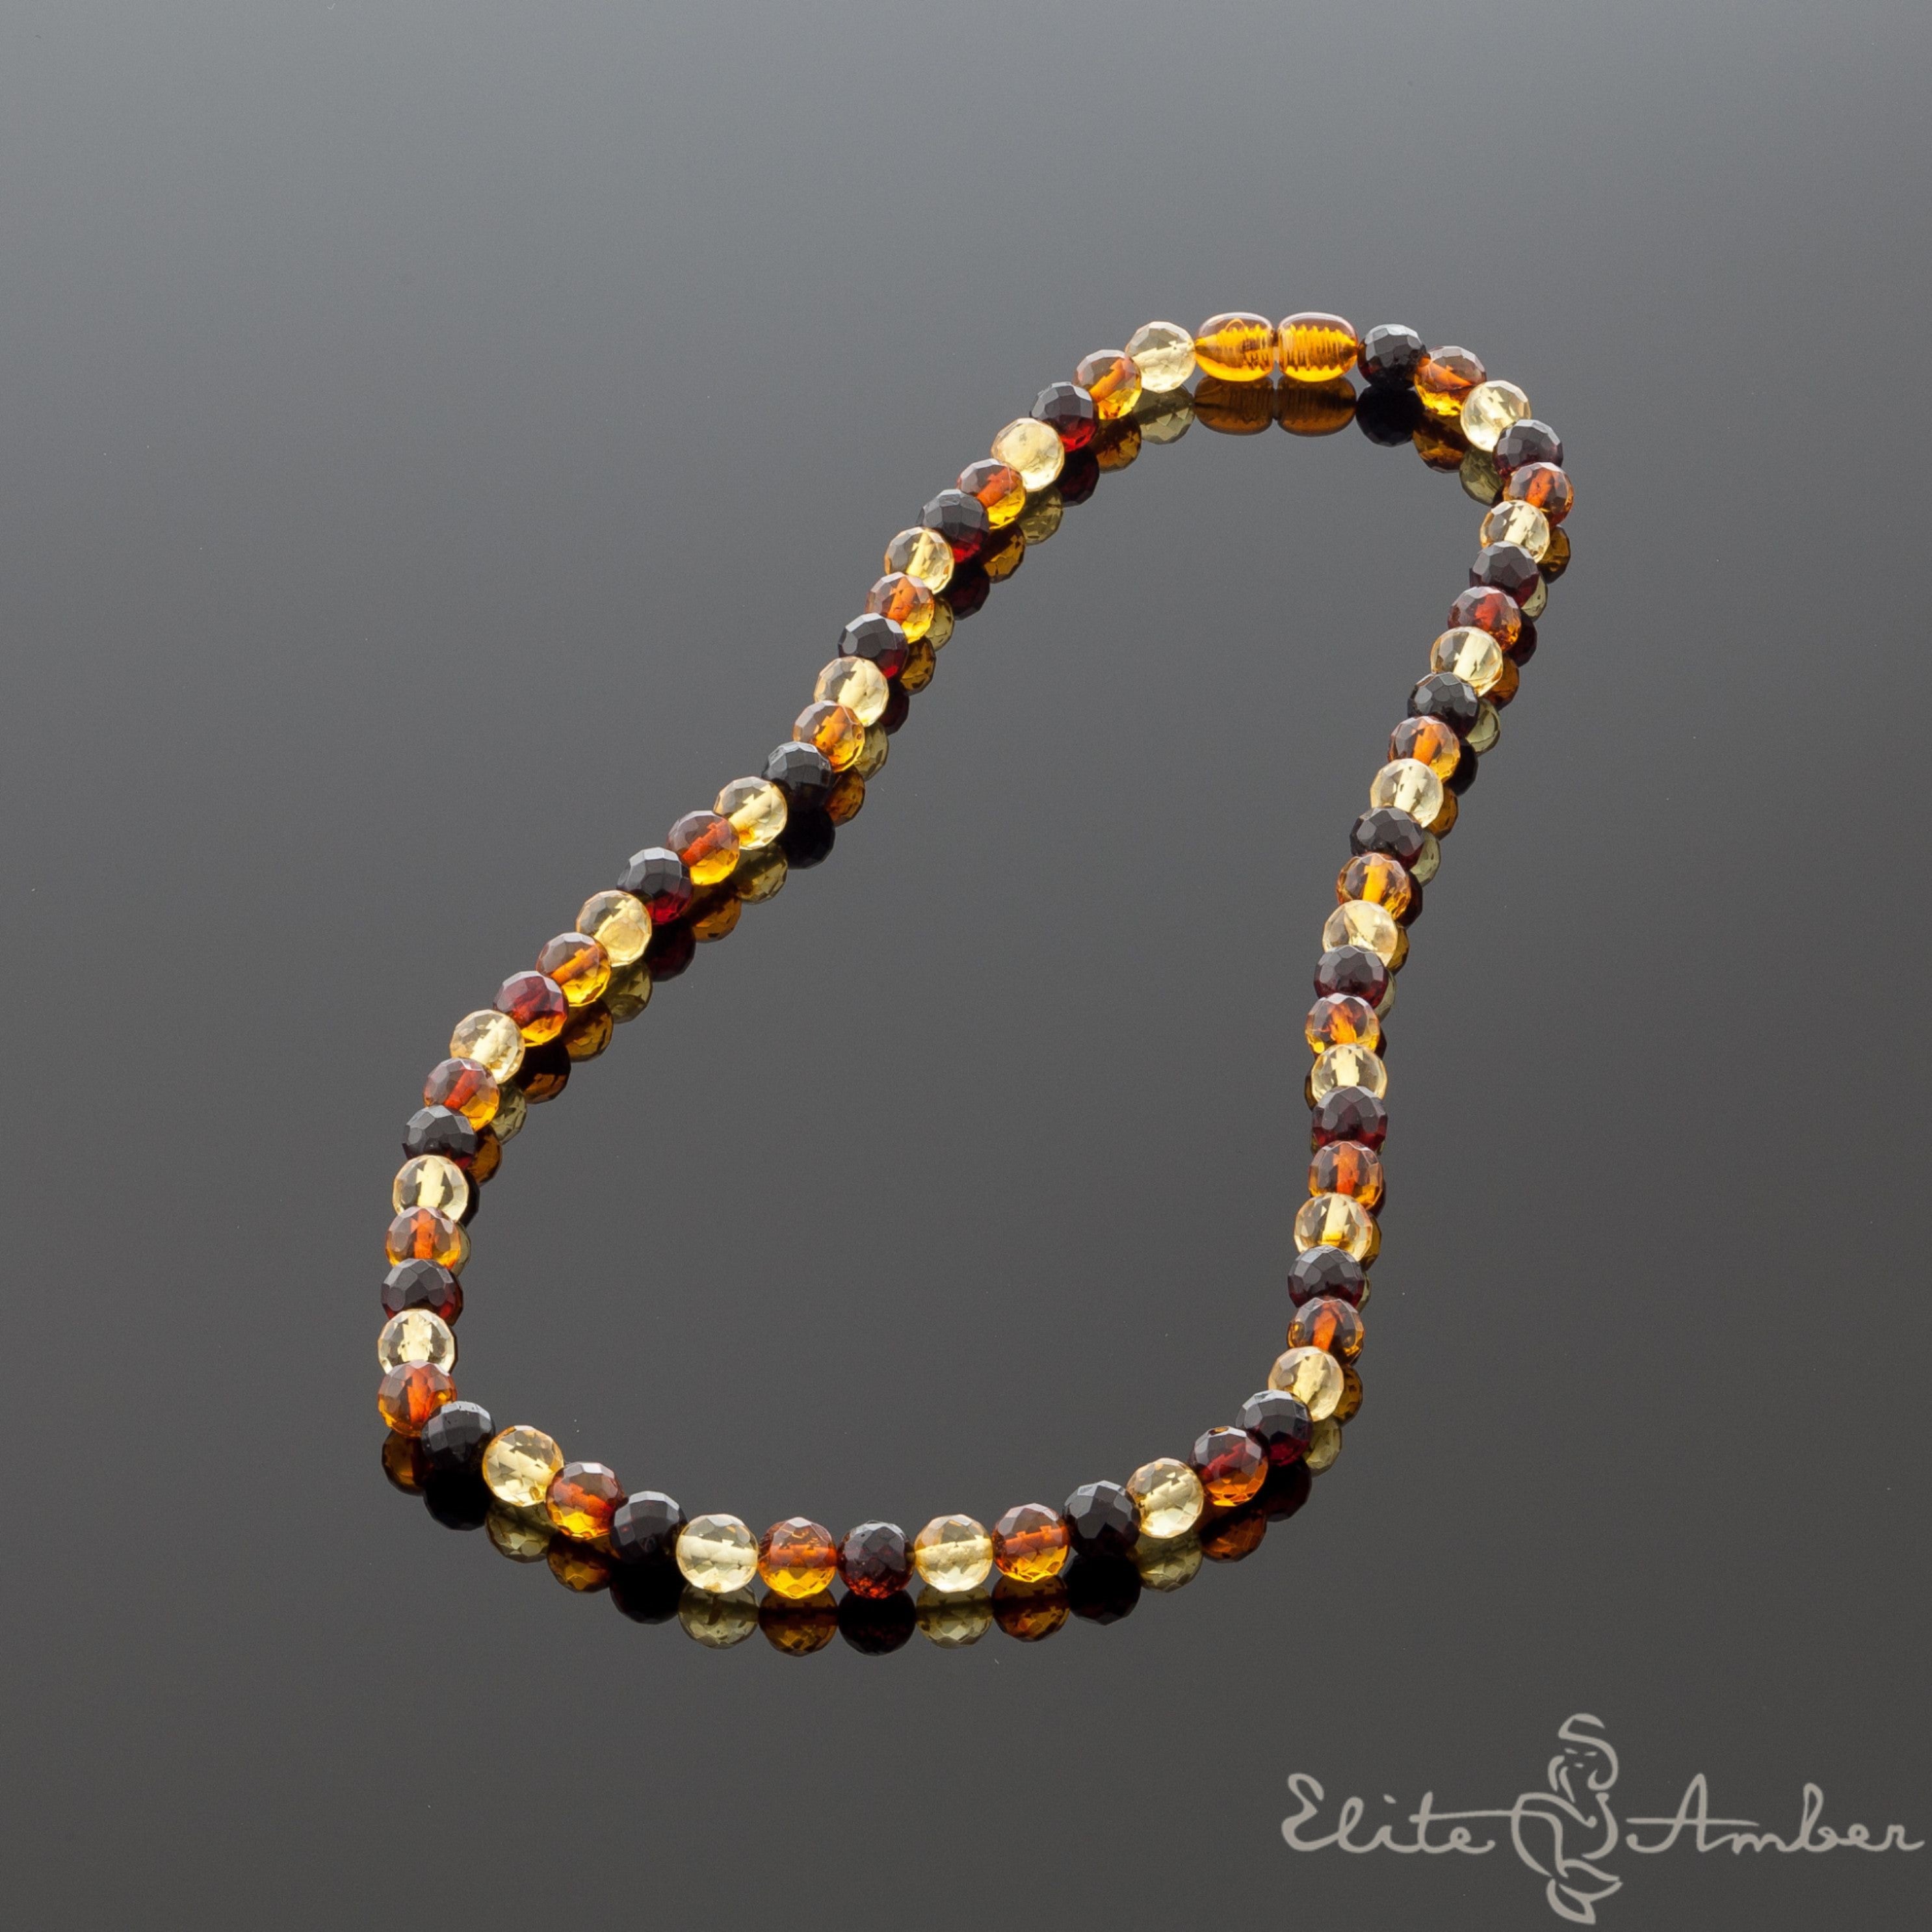 Amber necklace "Glossy colors"